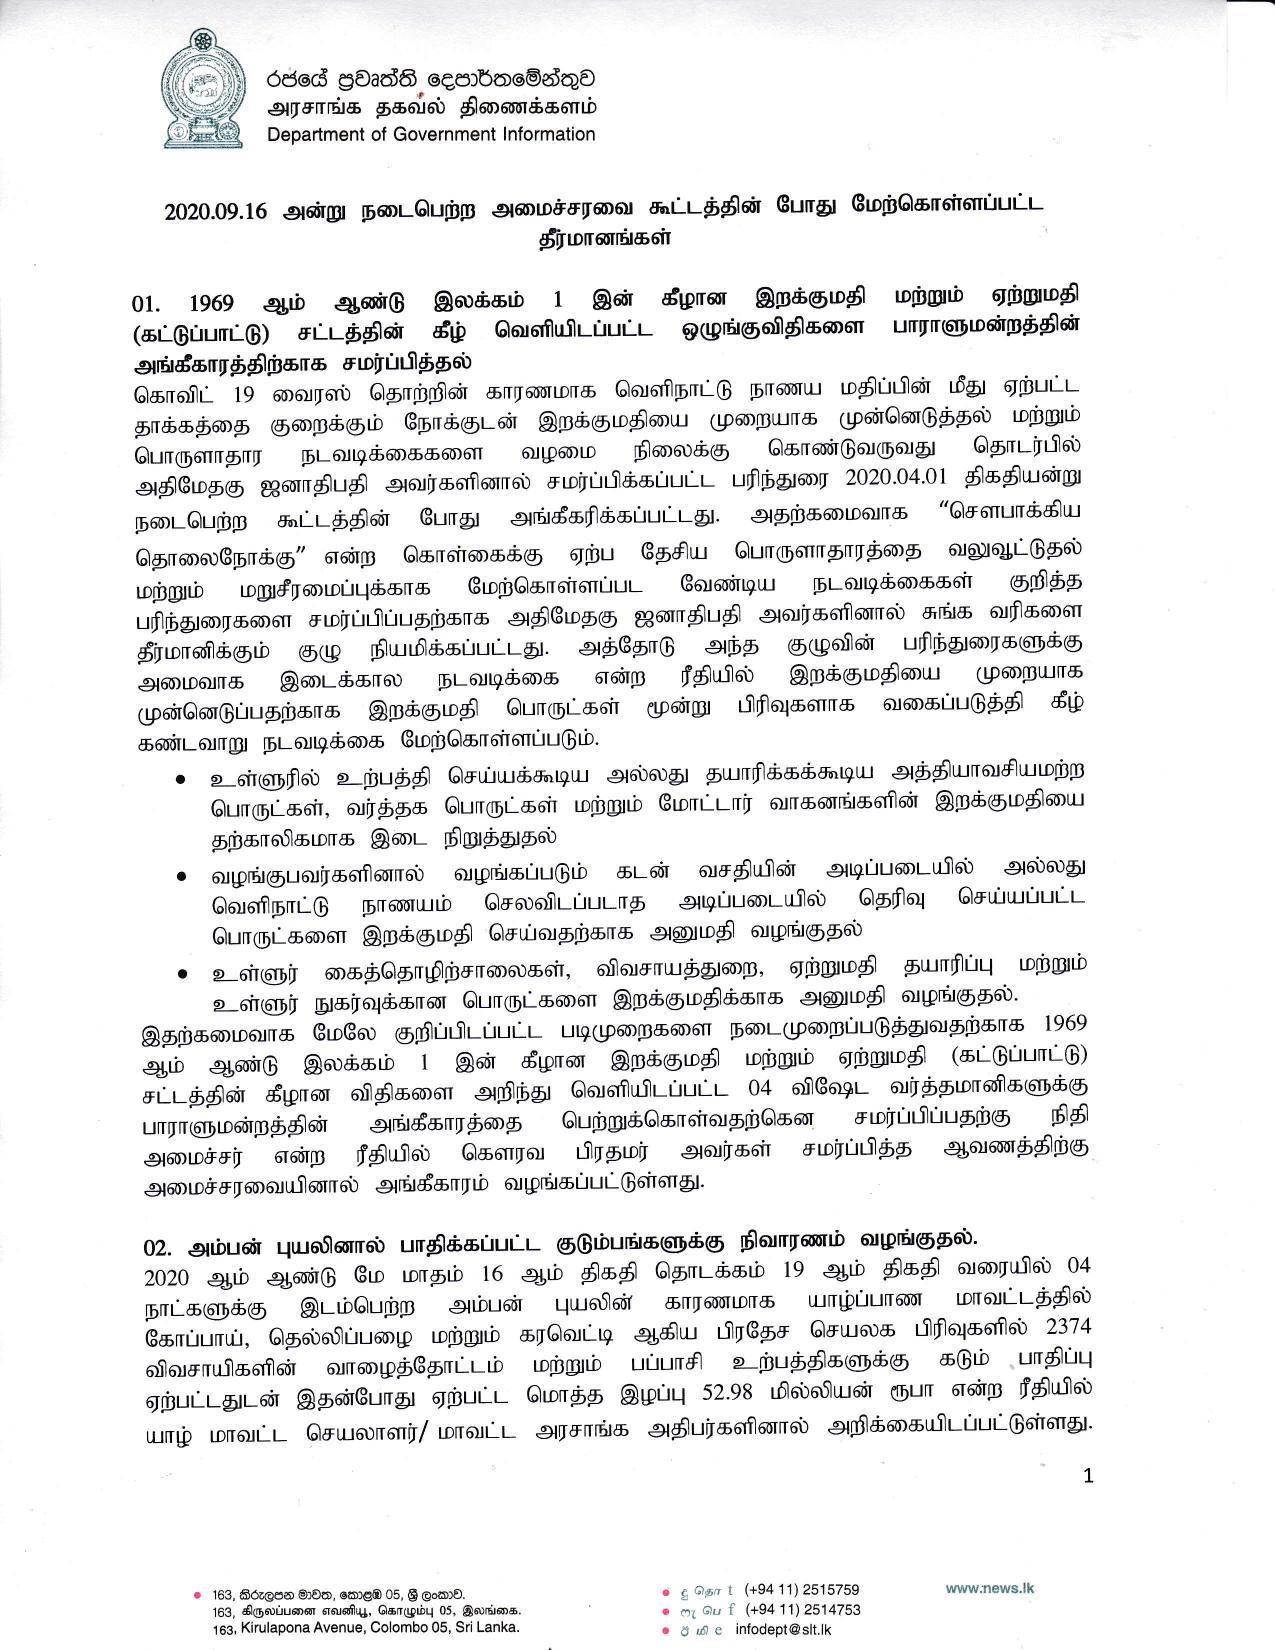 Cabinet Decision on 16.09.2020 0 Tamil 1 page 001